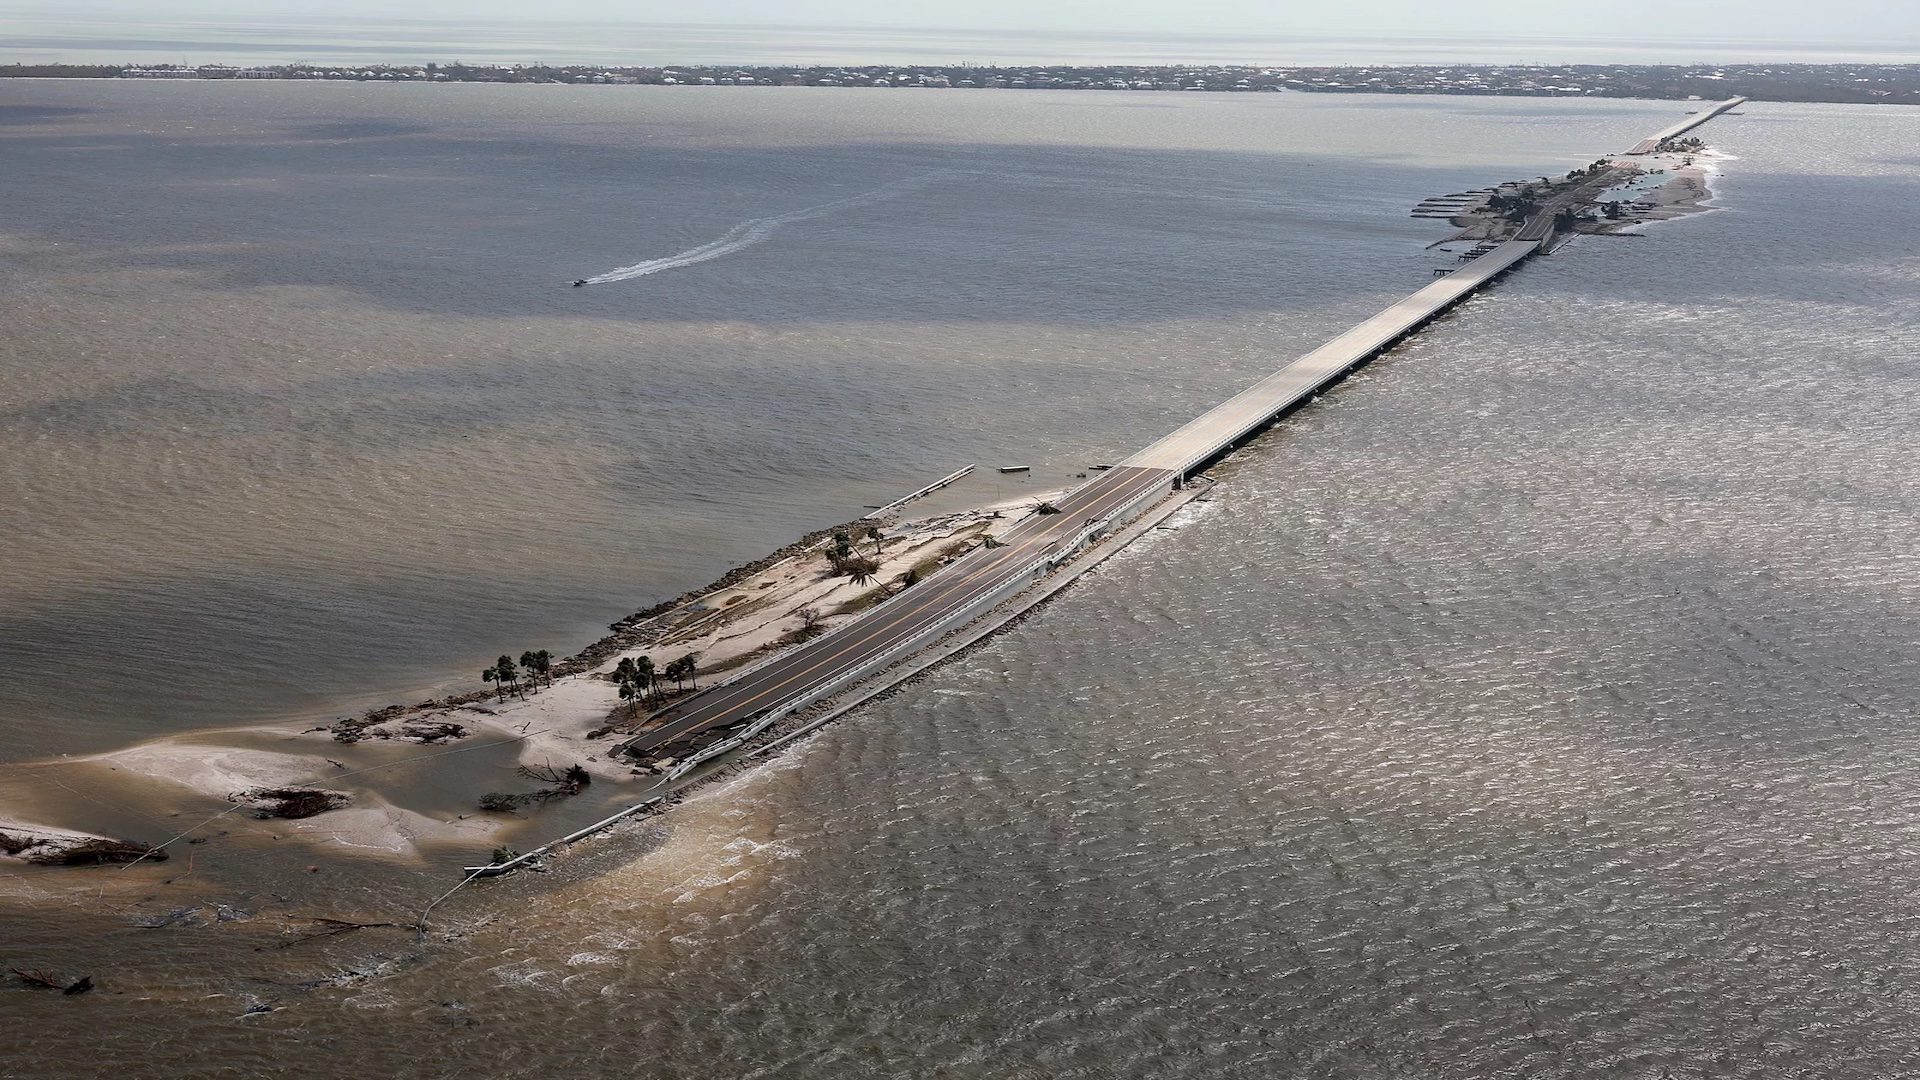 Aftermath of Hurricane Ian as parts of the Sanibel Causeway were washed away